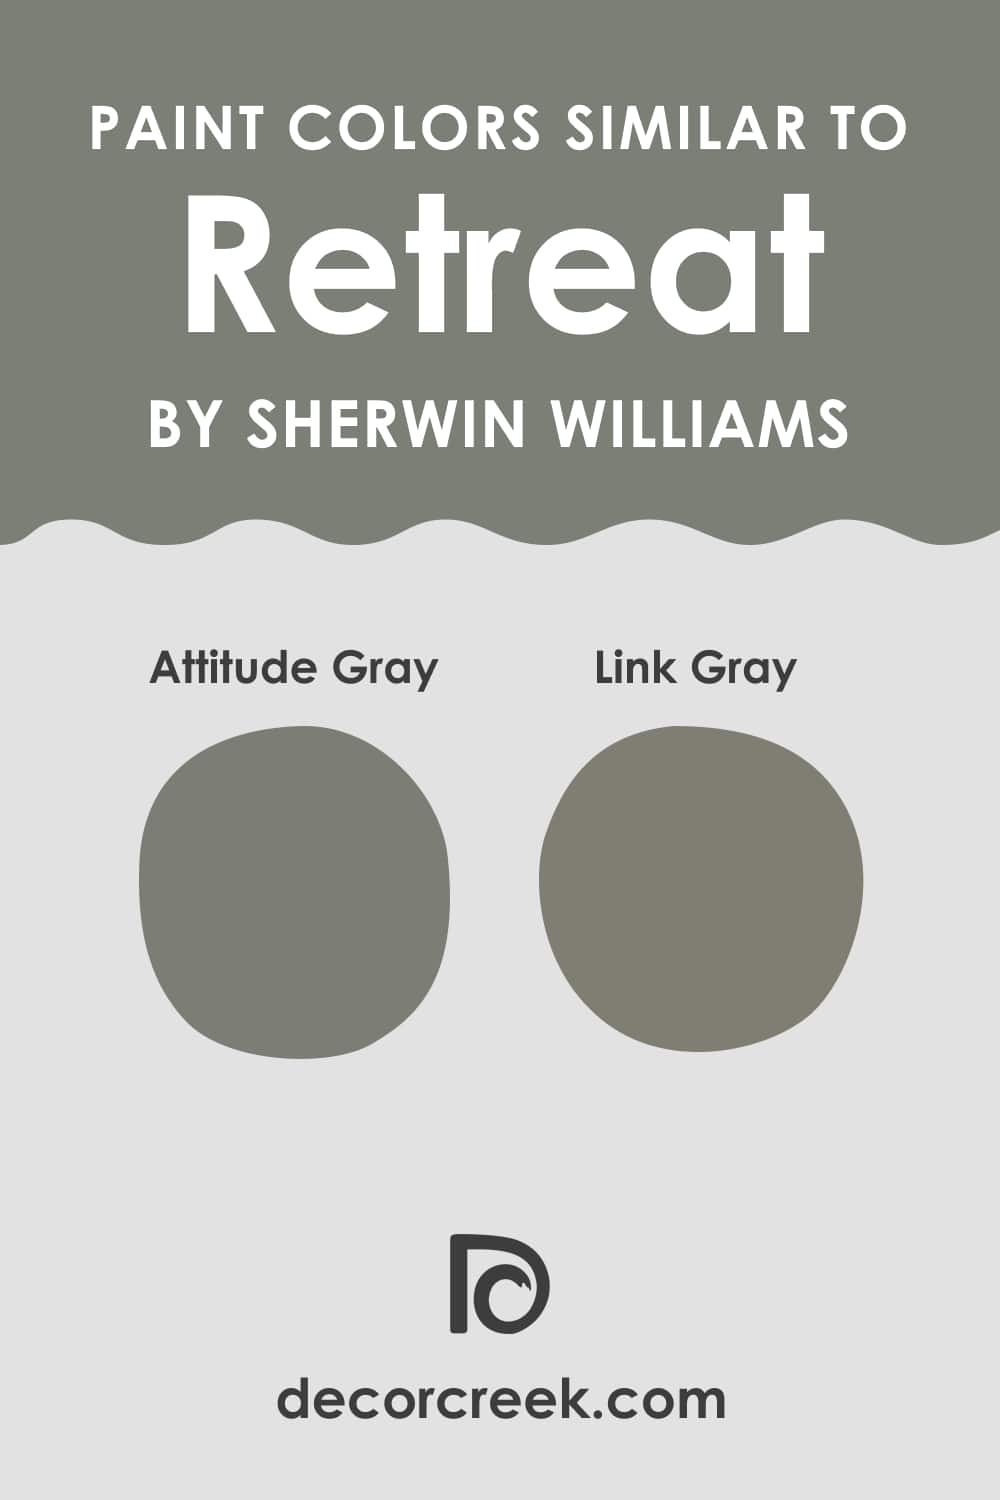 What Colors Are Considered Similar to Retreat by Sherwin-Williams?